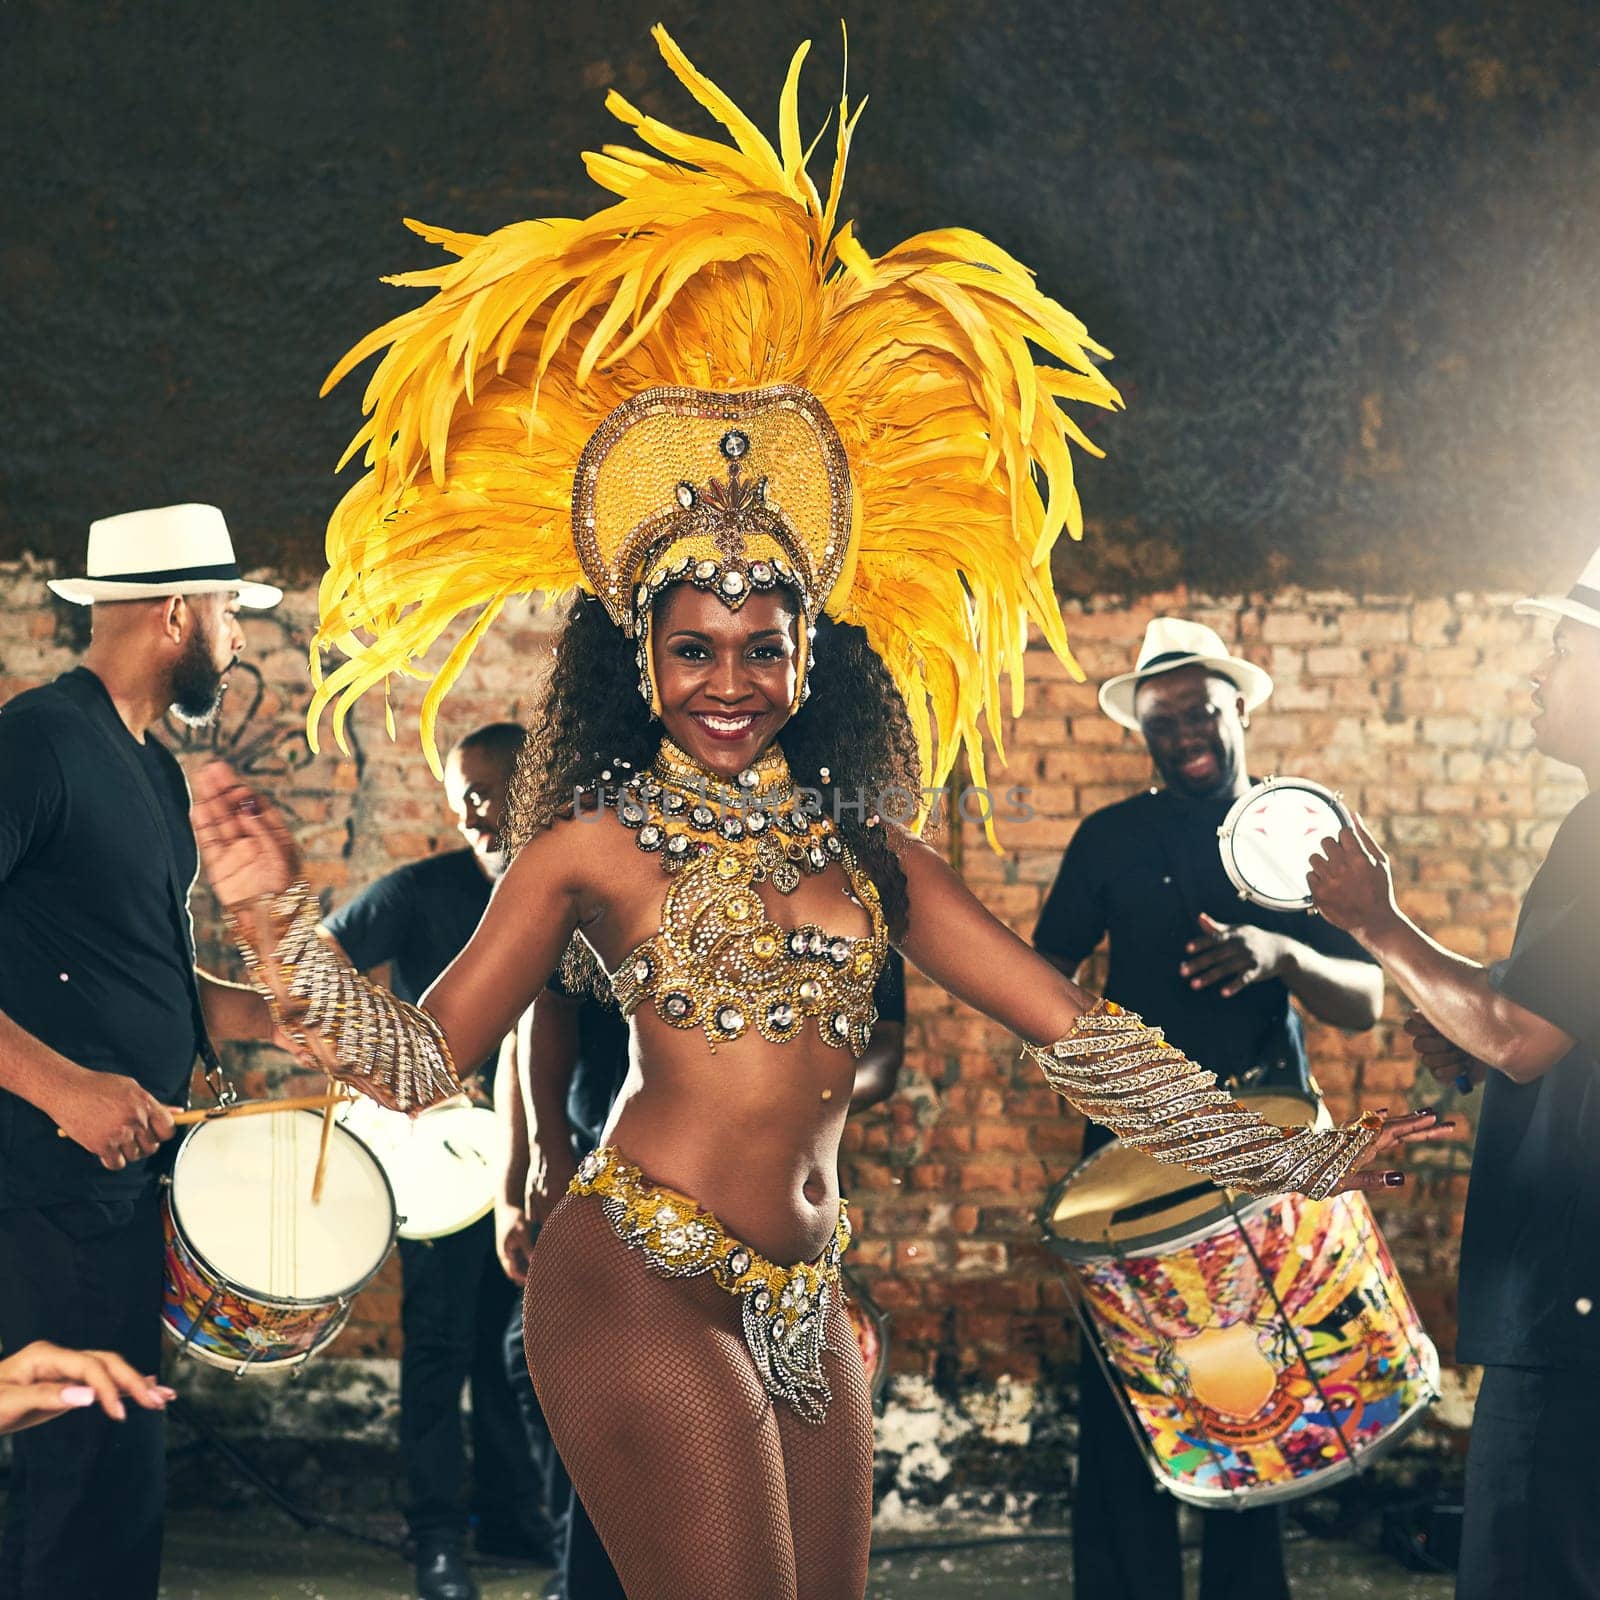 Samba, dance and black woman at Carnival to celebrate, night energy and holiday party in Rio de Janeiro, Brazil. Street band, music smile and portrait of a dancer at an outdoor festival dancing by YuriArcurs